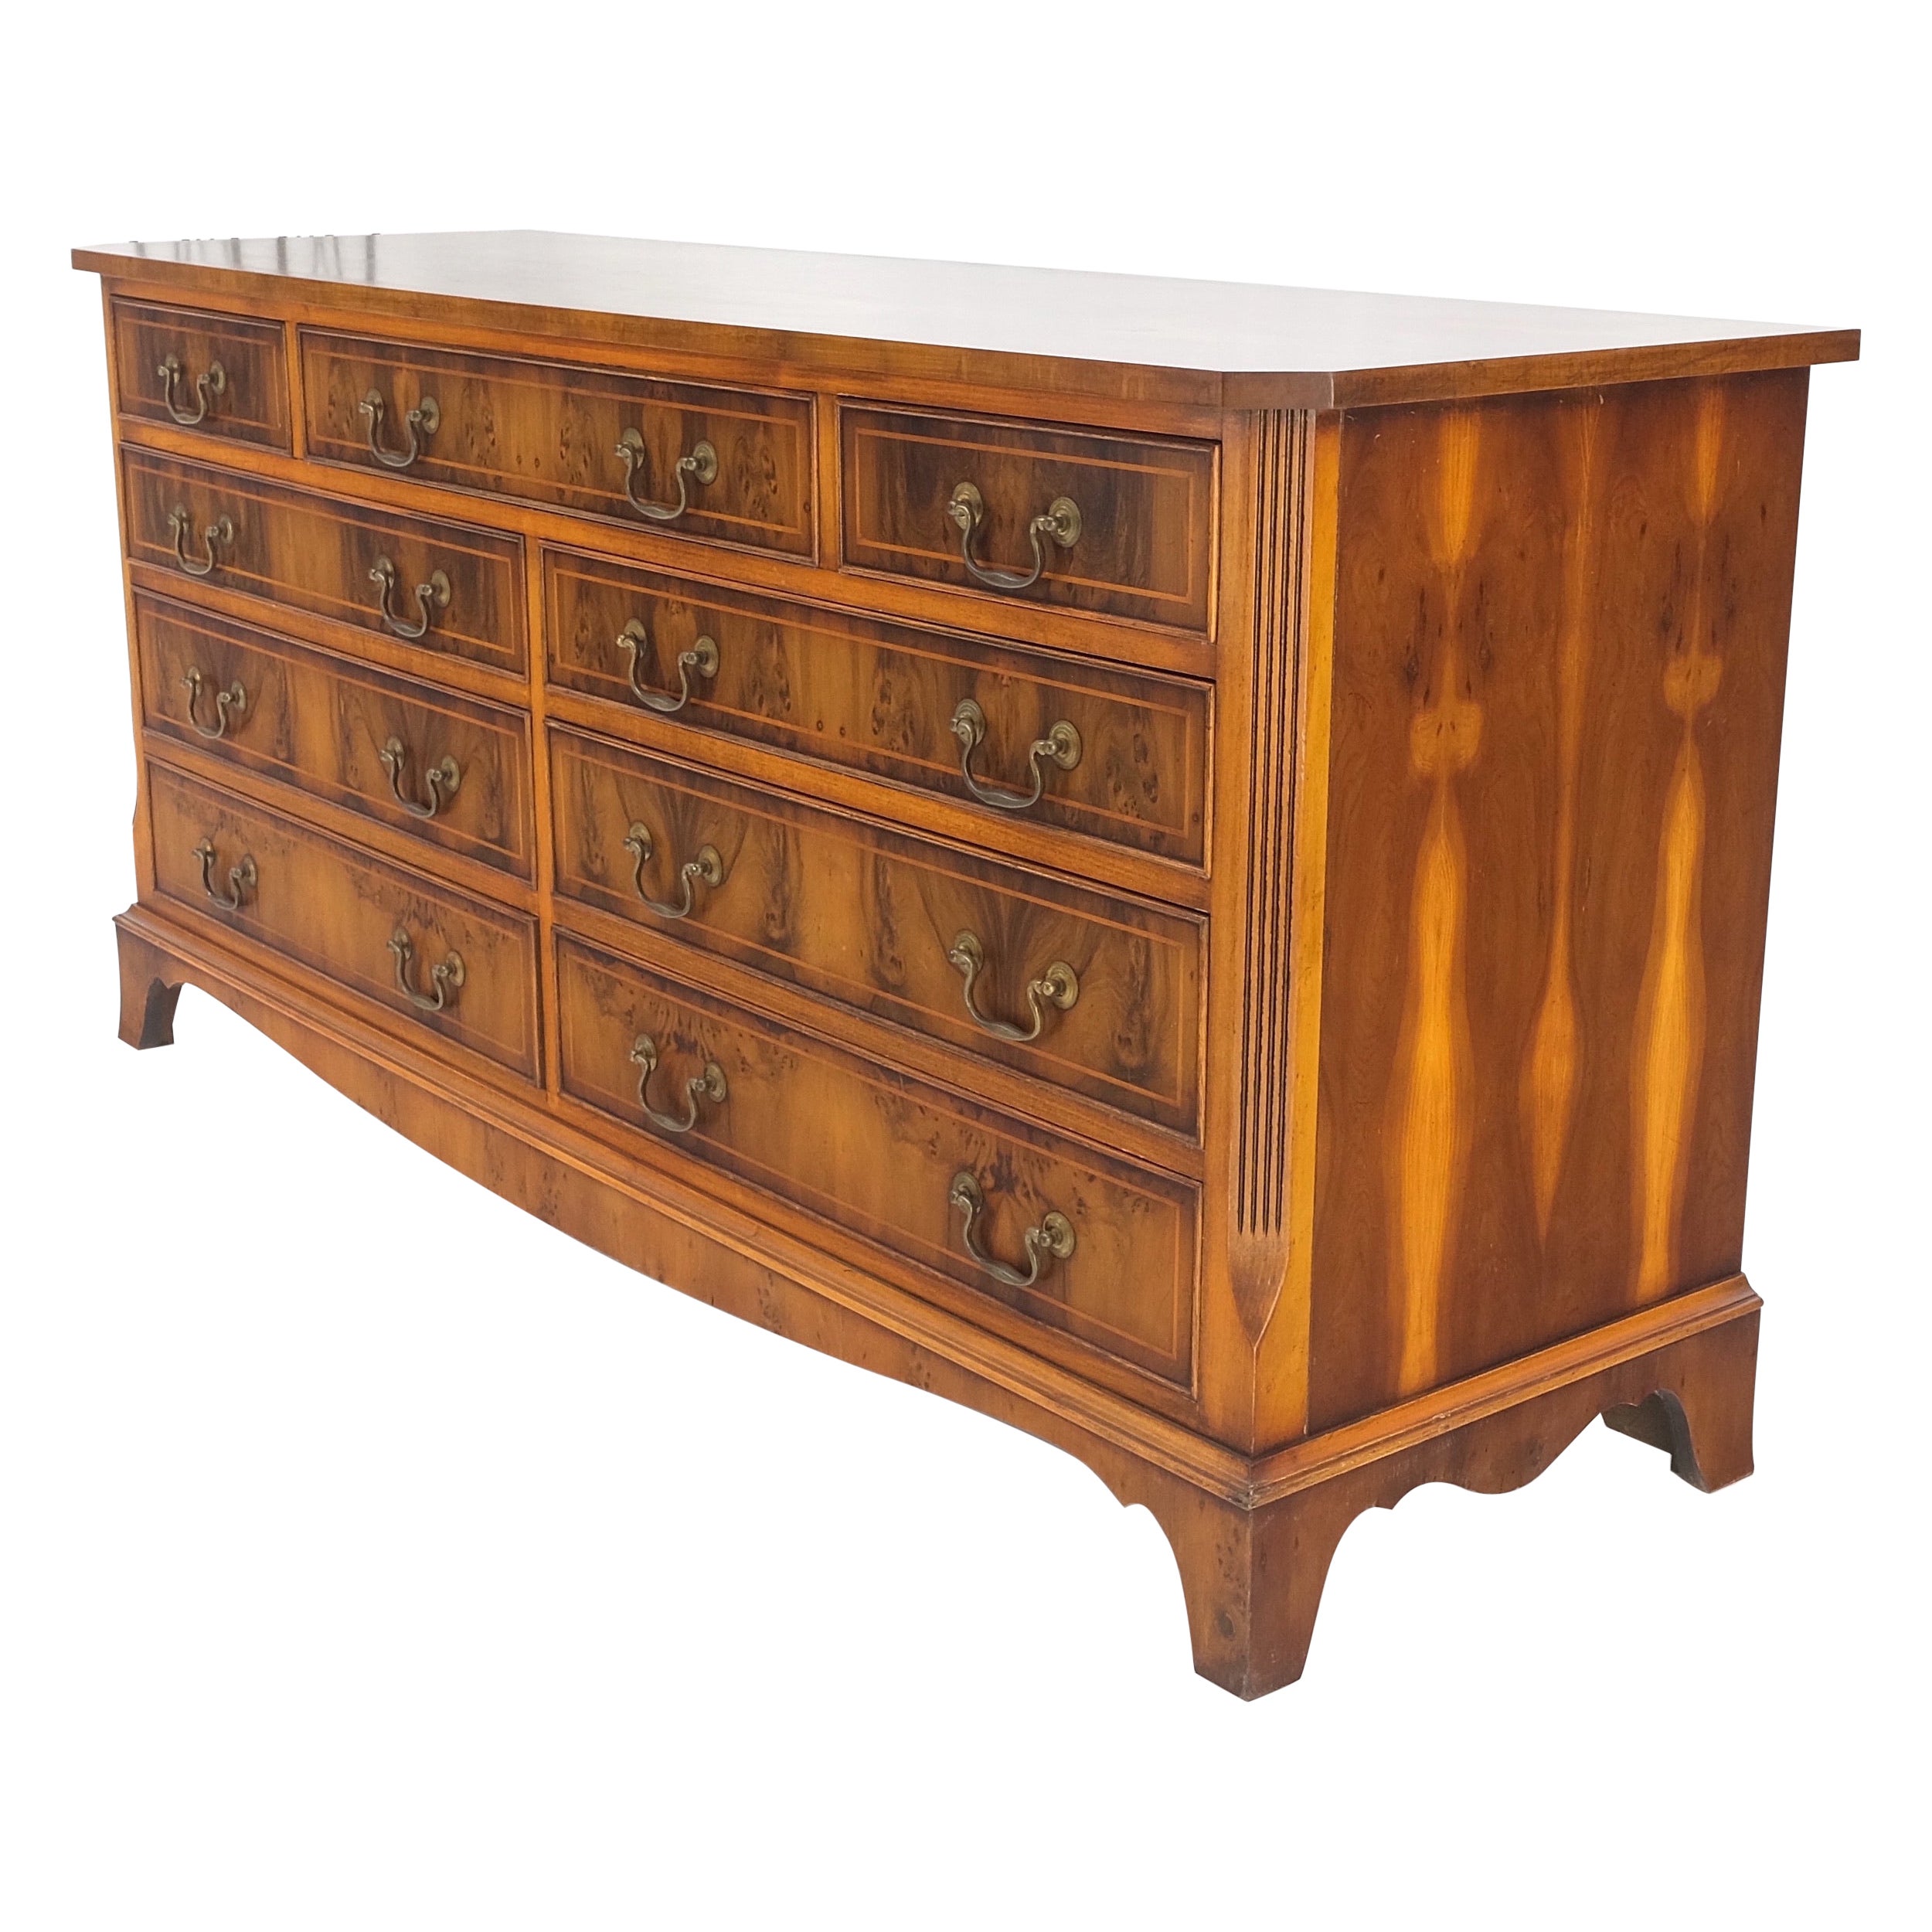 Yew Wood Long 9 Drawers Long Pencil Inlaid Dresser Credenza Brass Drops MINT! For Sale